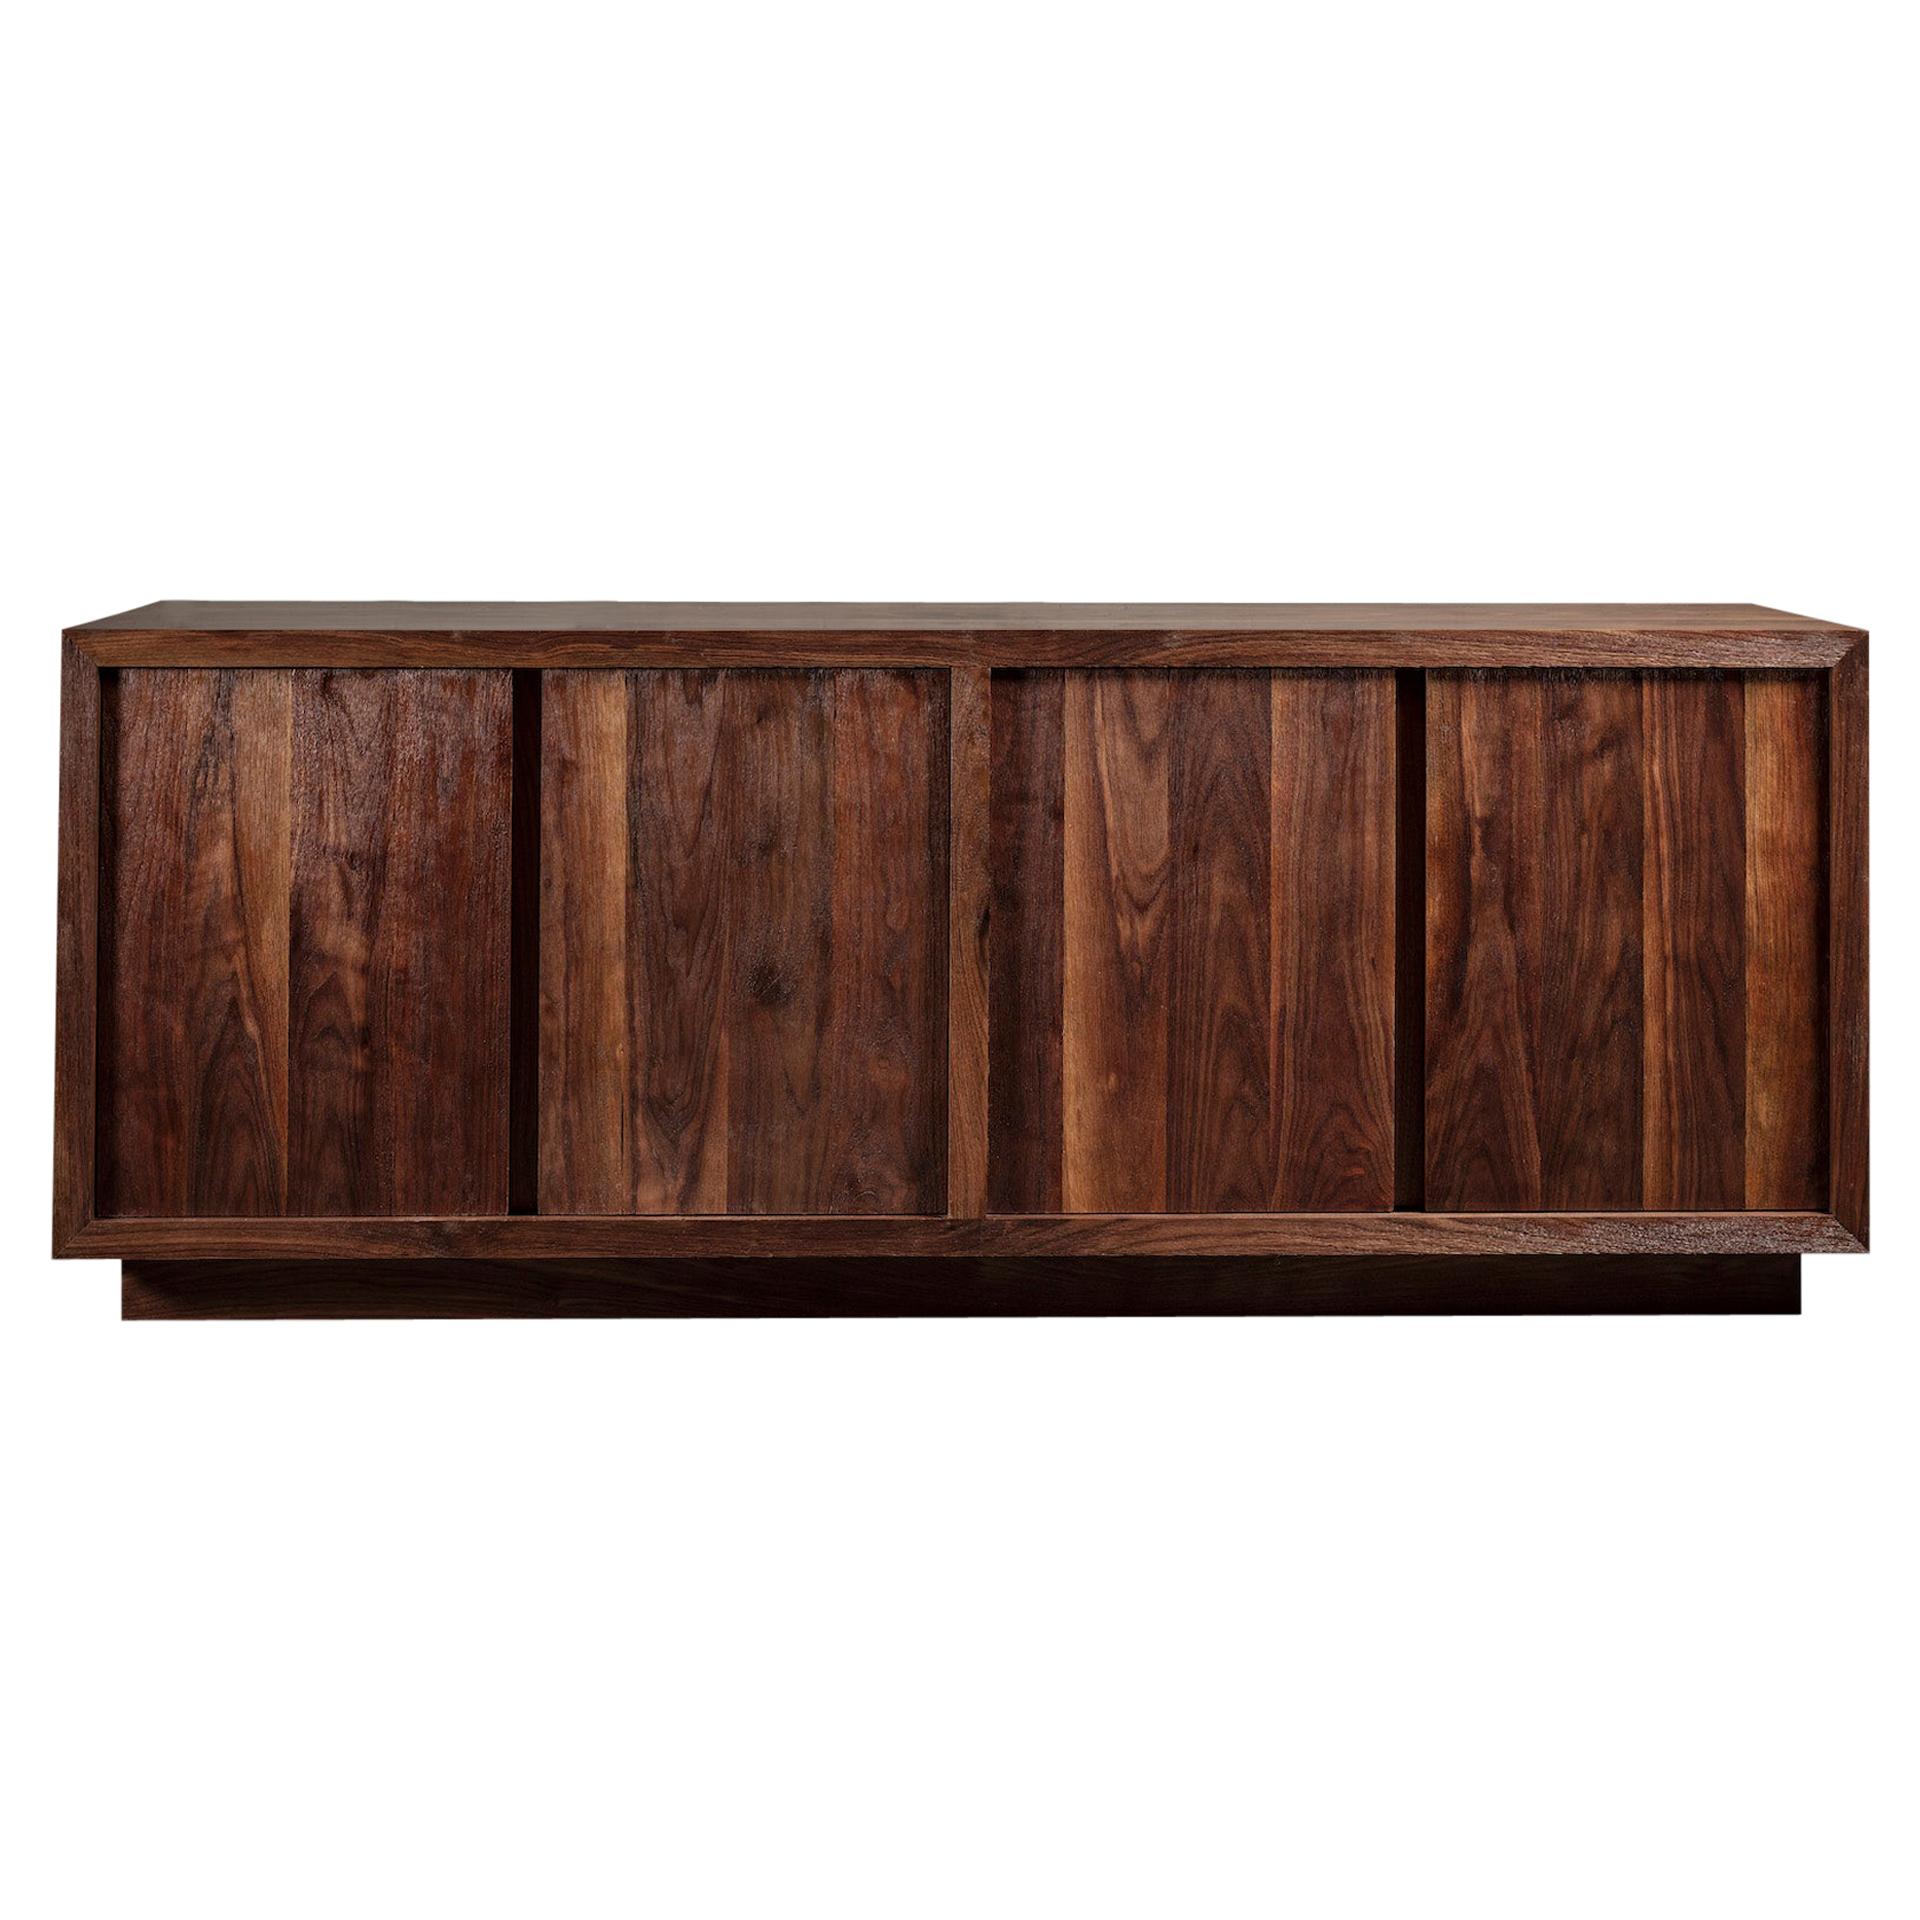 Natural Walnut Finish, Hand Crafted, Wood Graind and Textured Sideboard For Sale